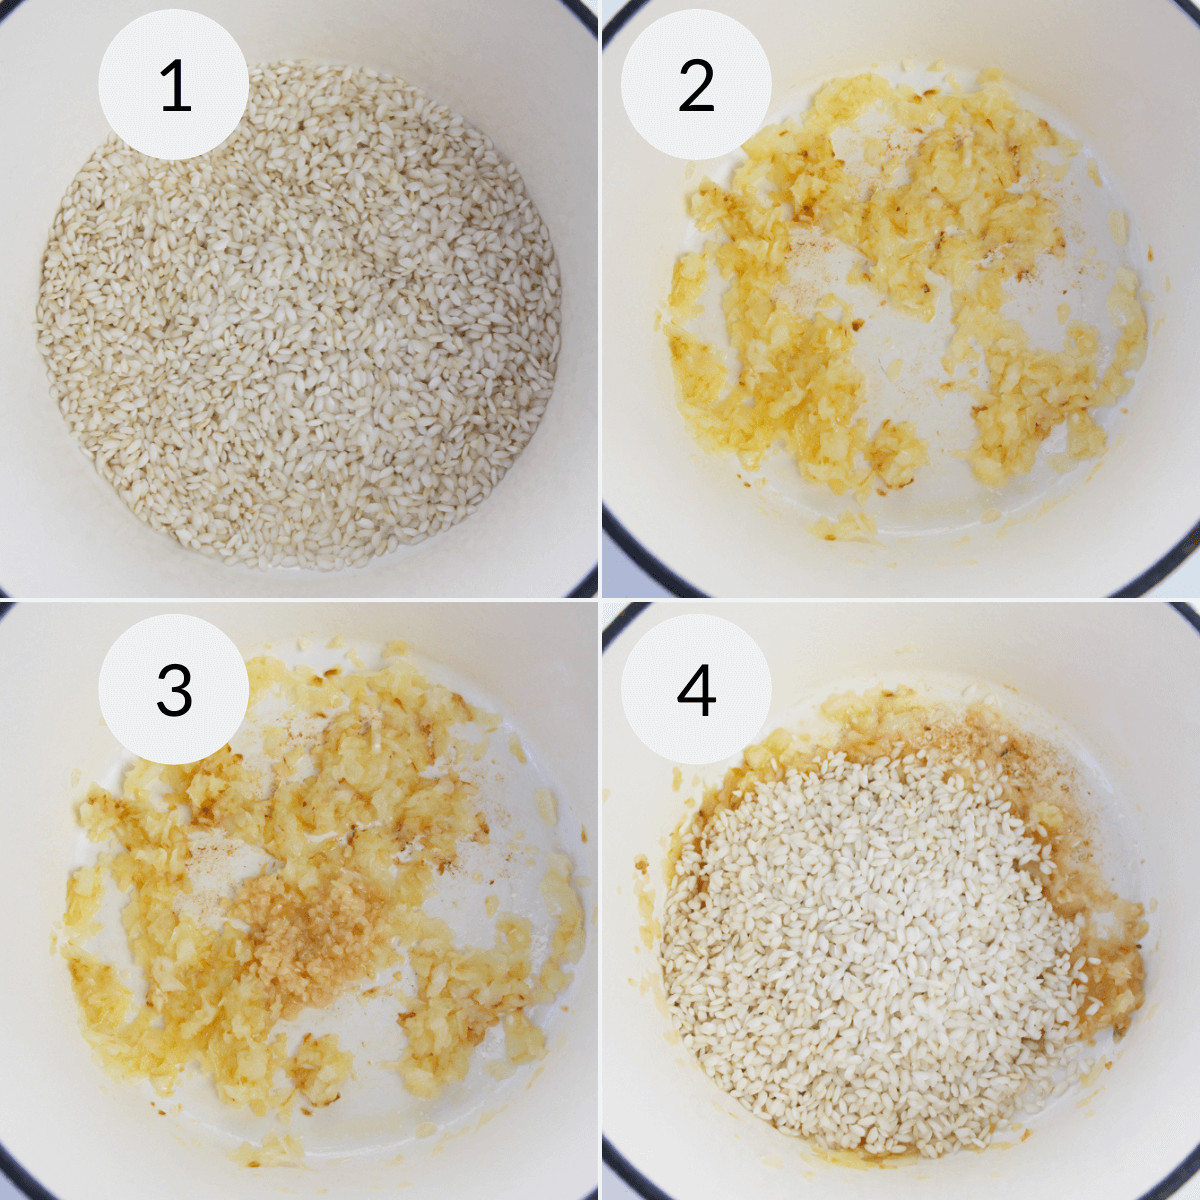 Four pictures illustrating the process of preparing the rice.